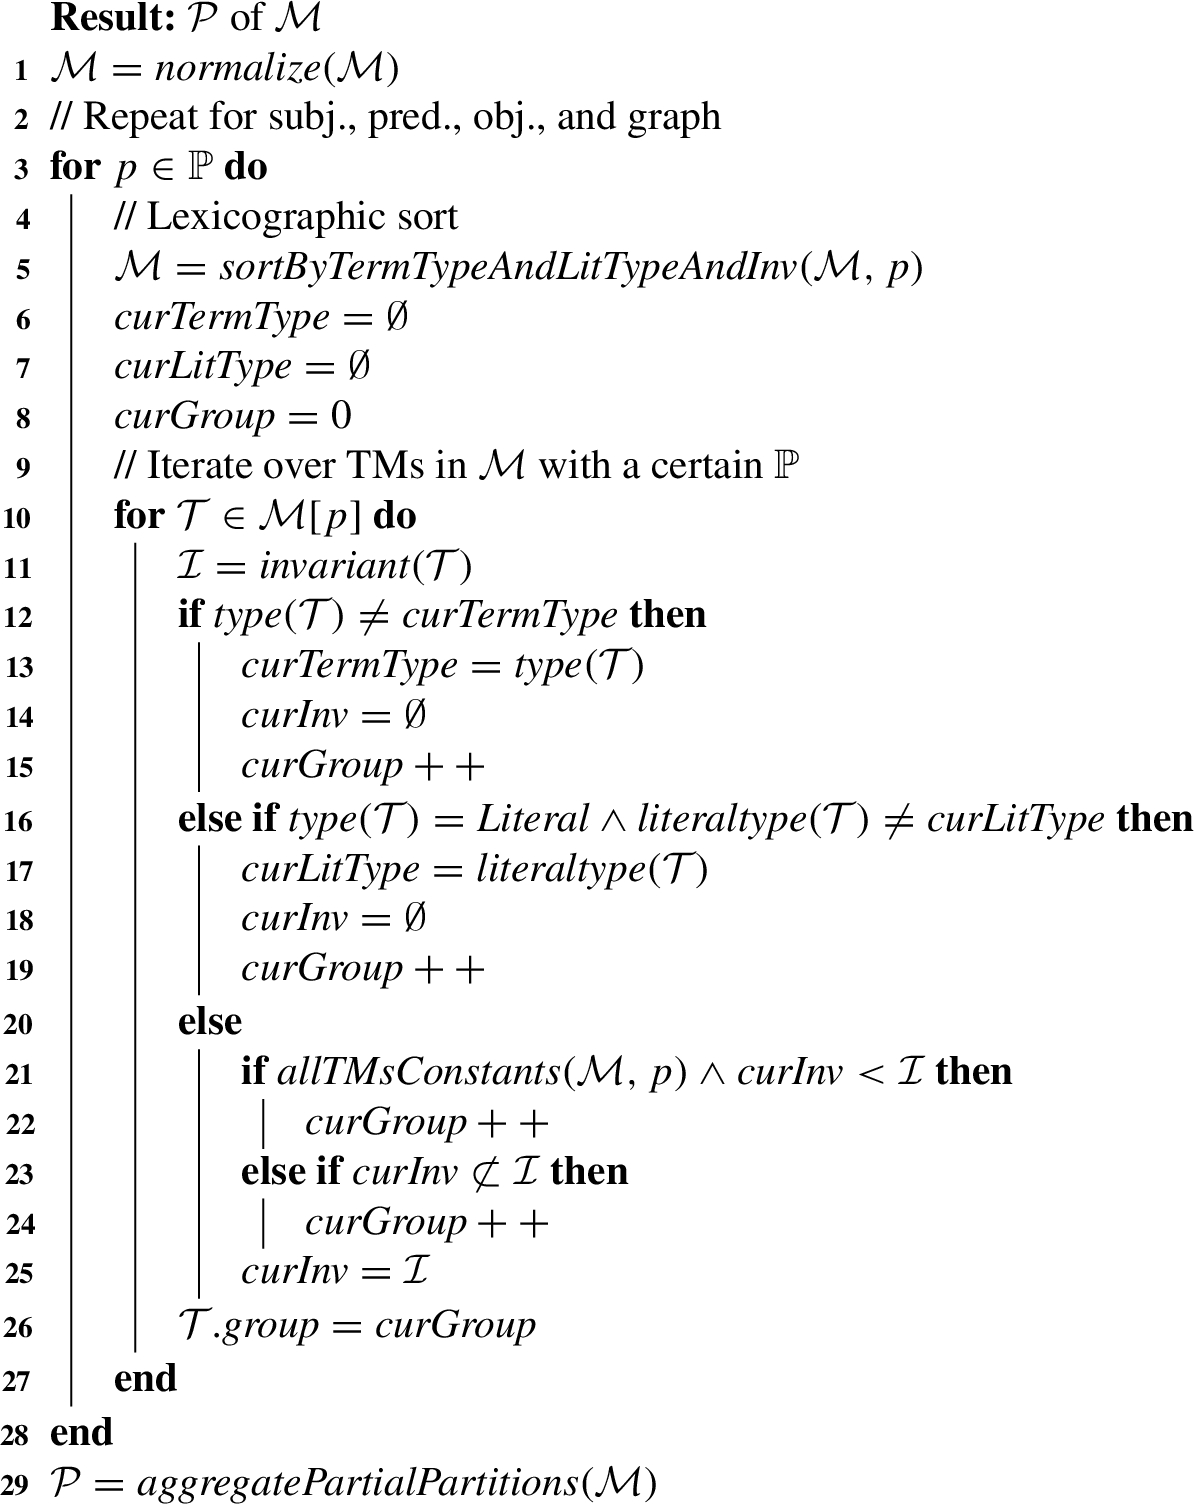 Partial-Aggregations Partitioning of an [R2]RML document, M